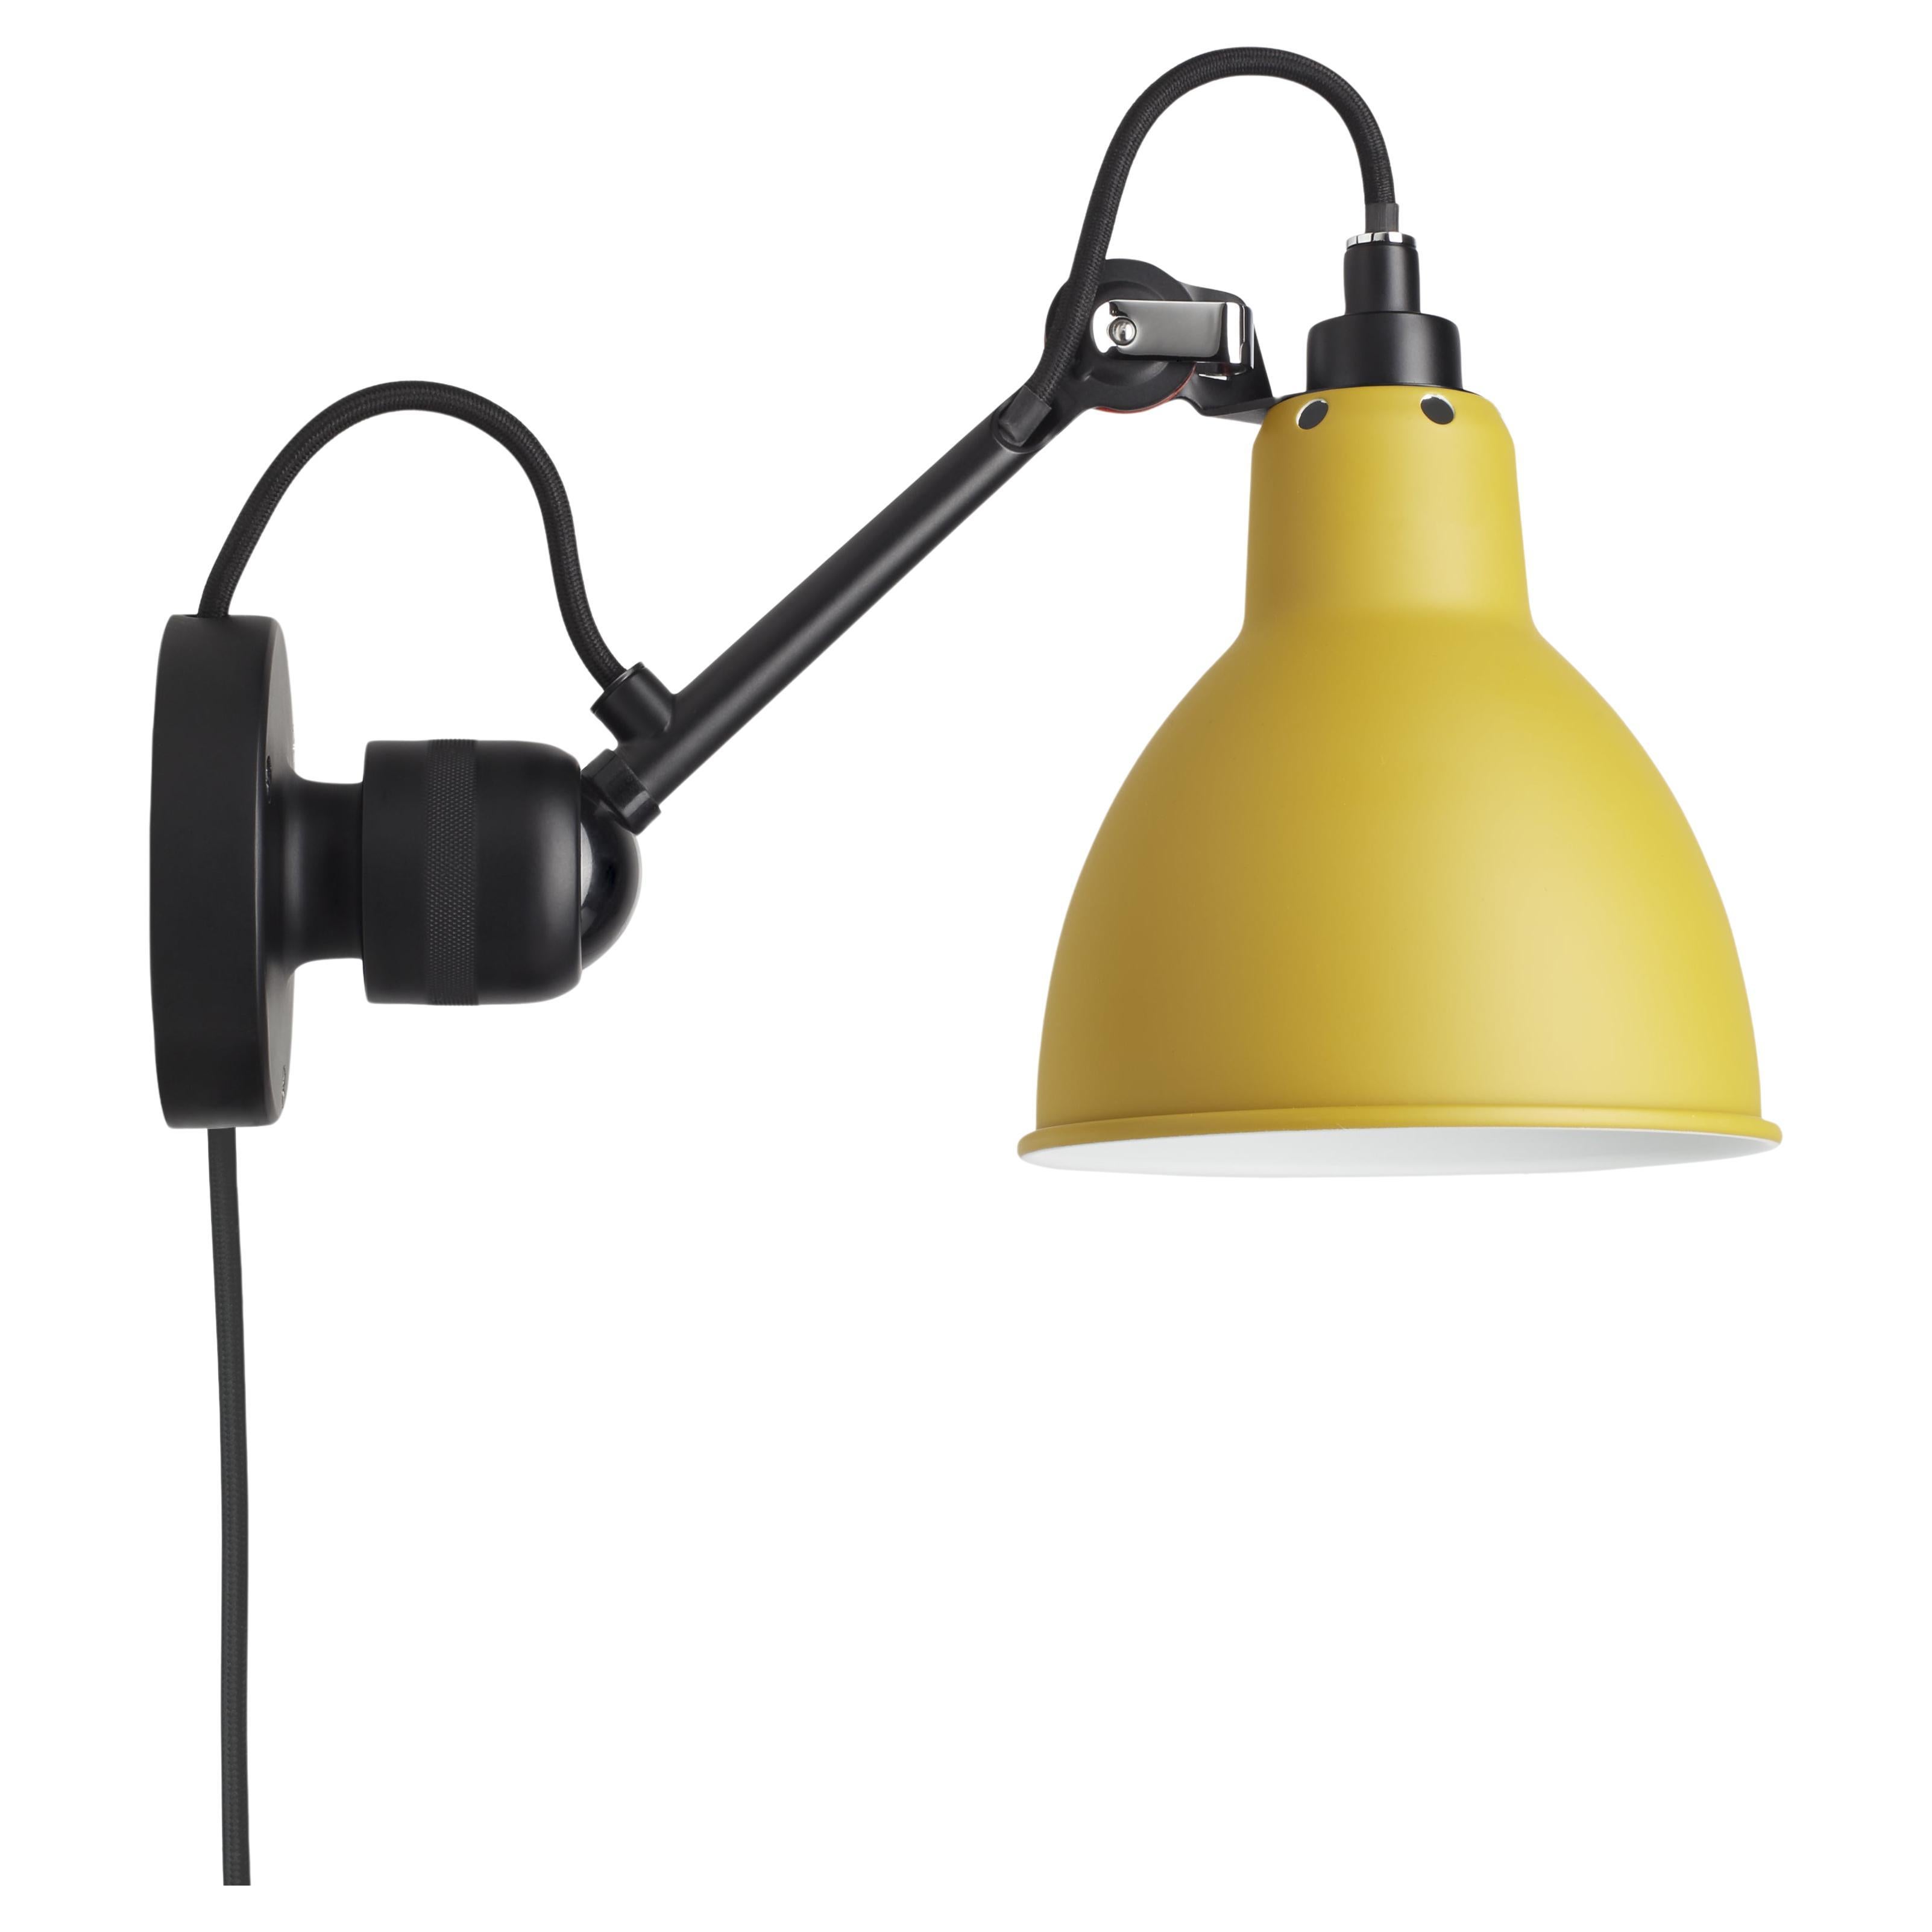 DCW Editions La Lampe Gras N°304 CA Wall Lamp in Black Arm and Yellow Shade For Sale